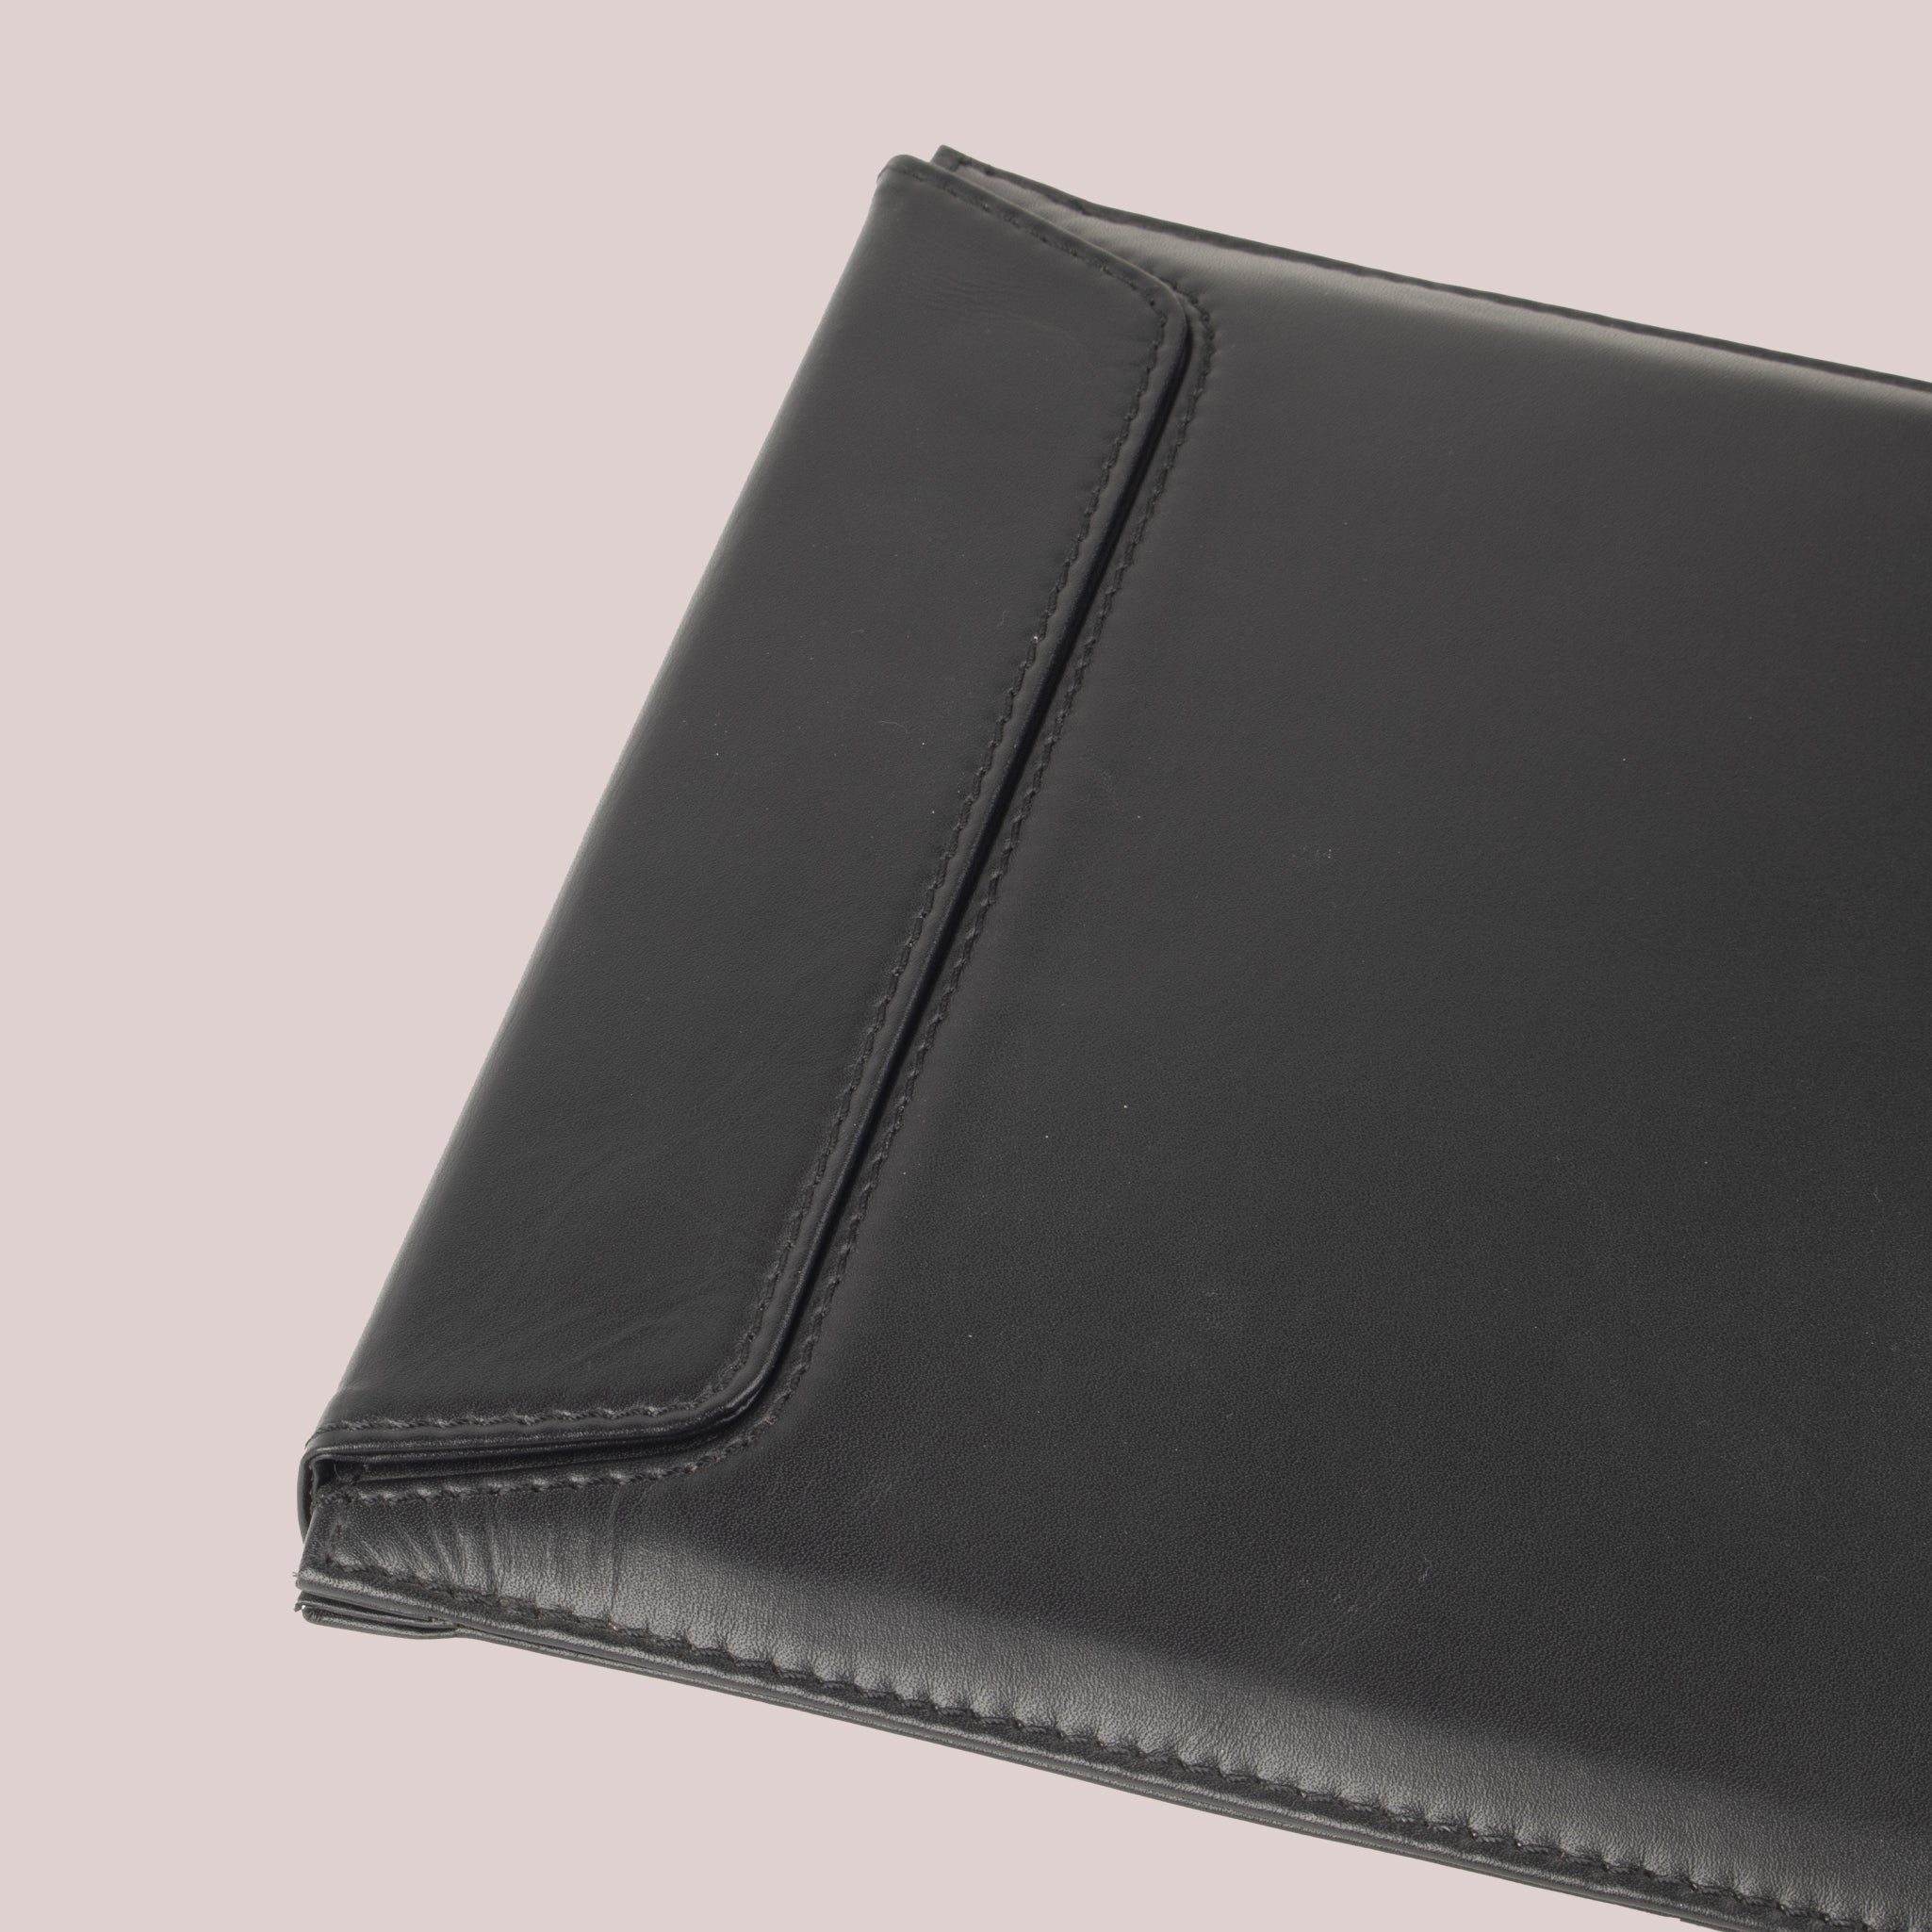 Shop Black MacBook Pro 13 Note Sleeves at the best price